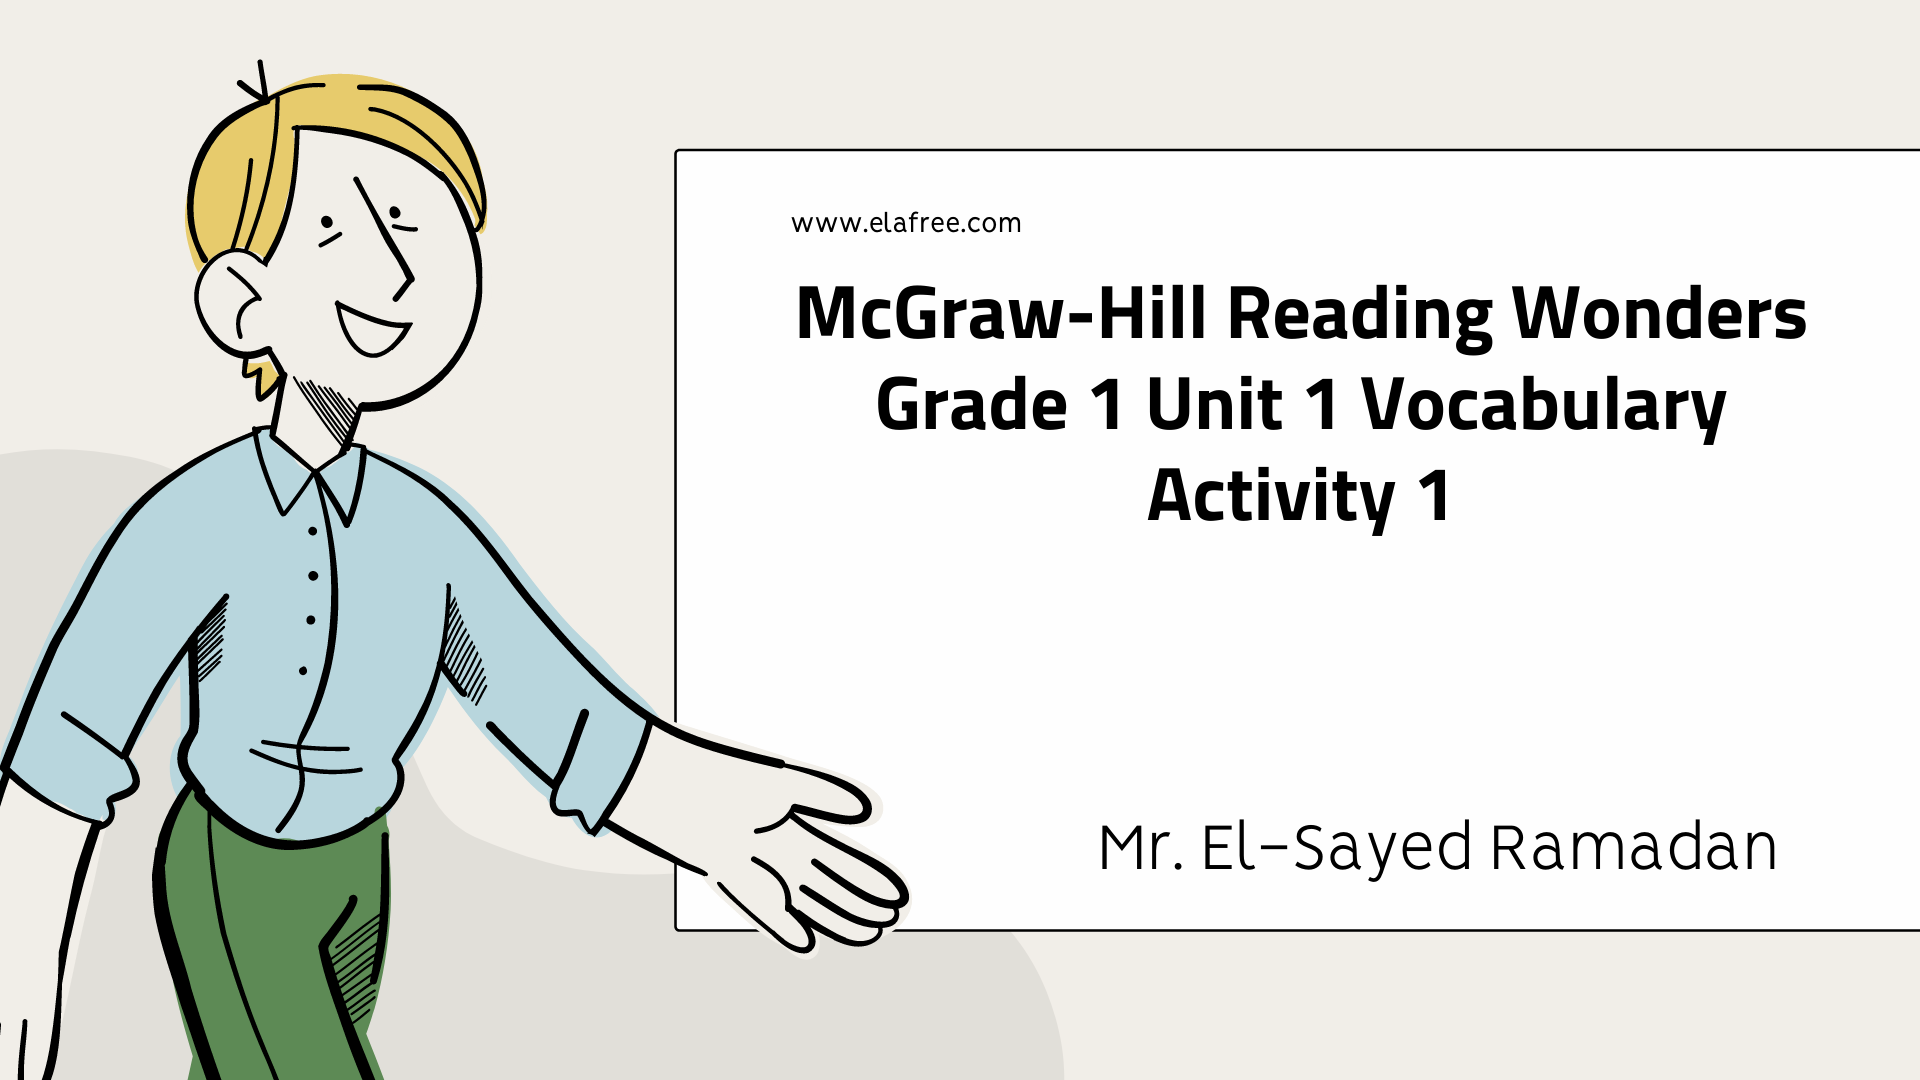 mcgraw-hill-reading-wonders-2020-grade-1-unit-1-week-1high-frequency